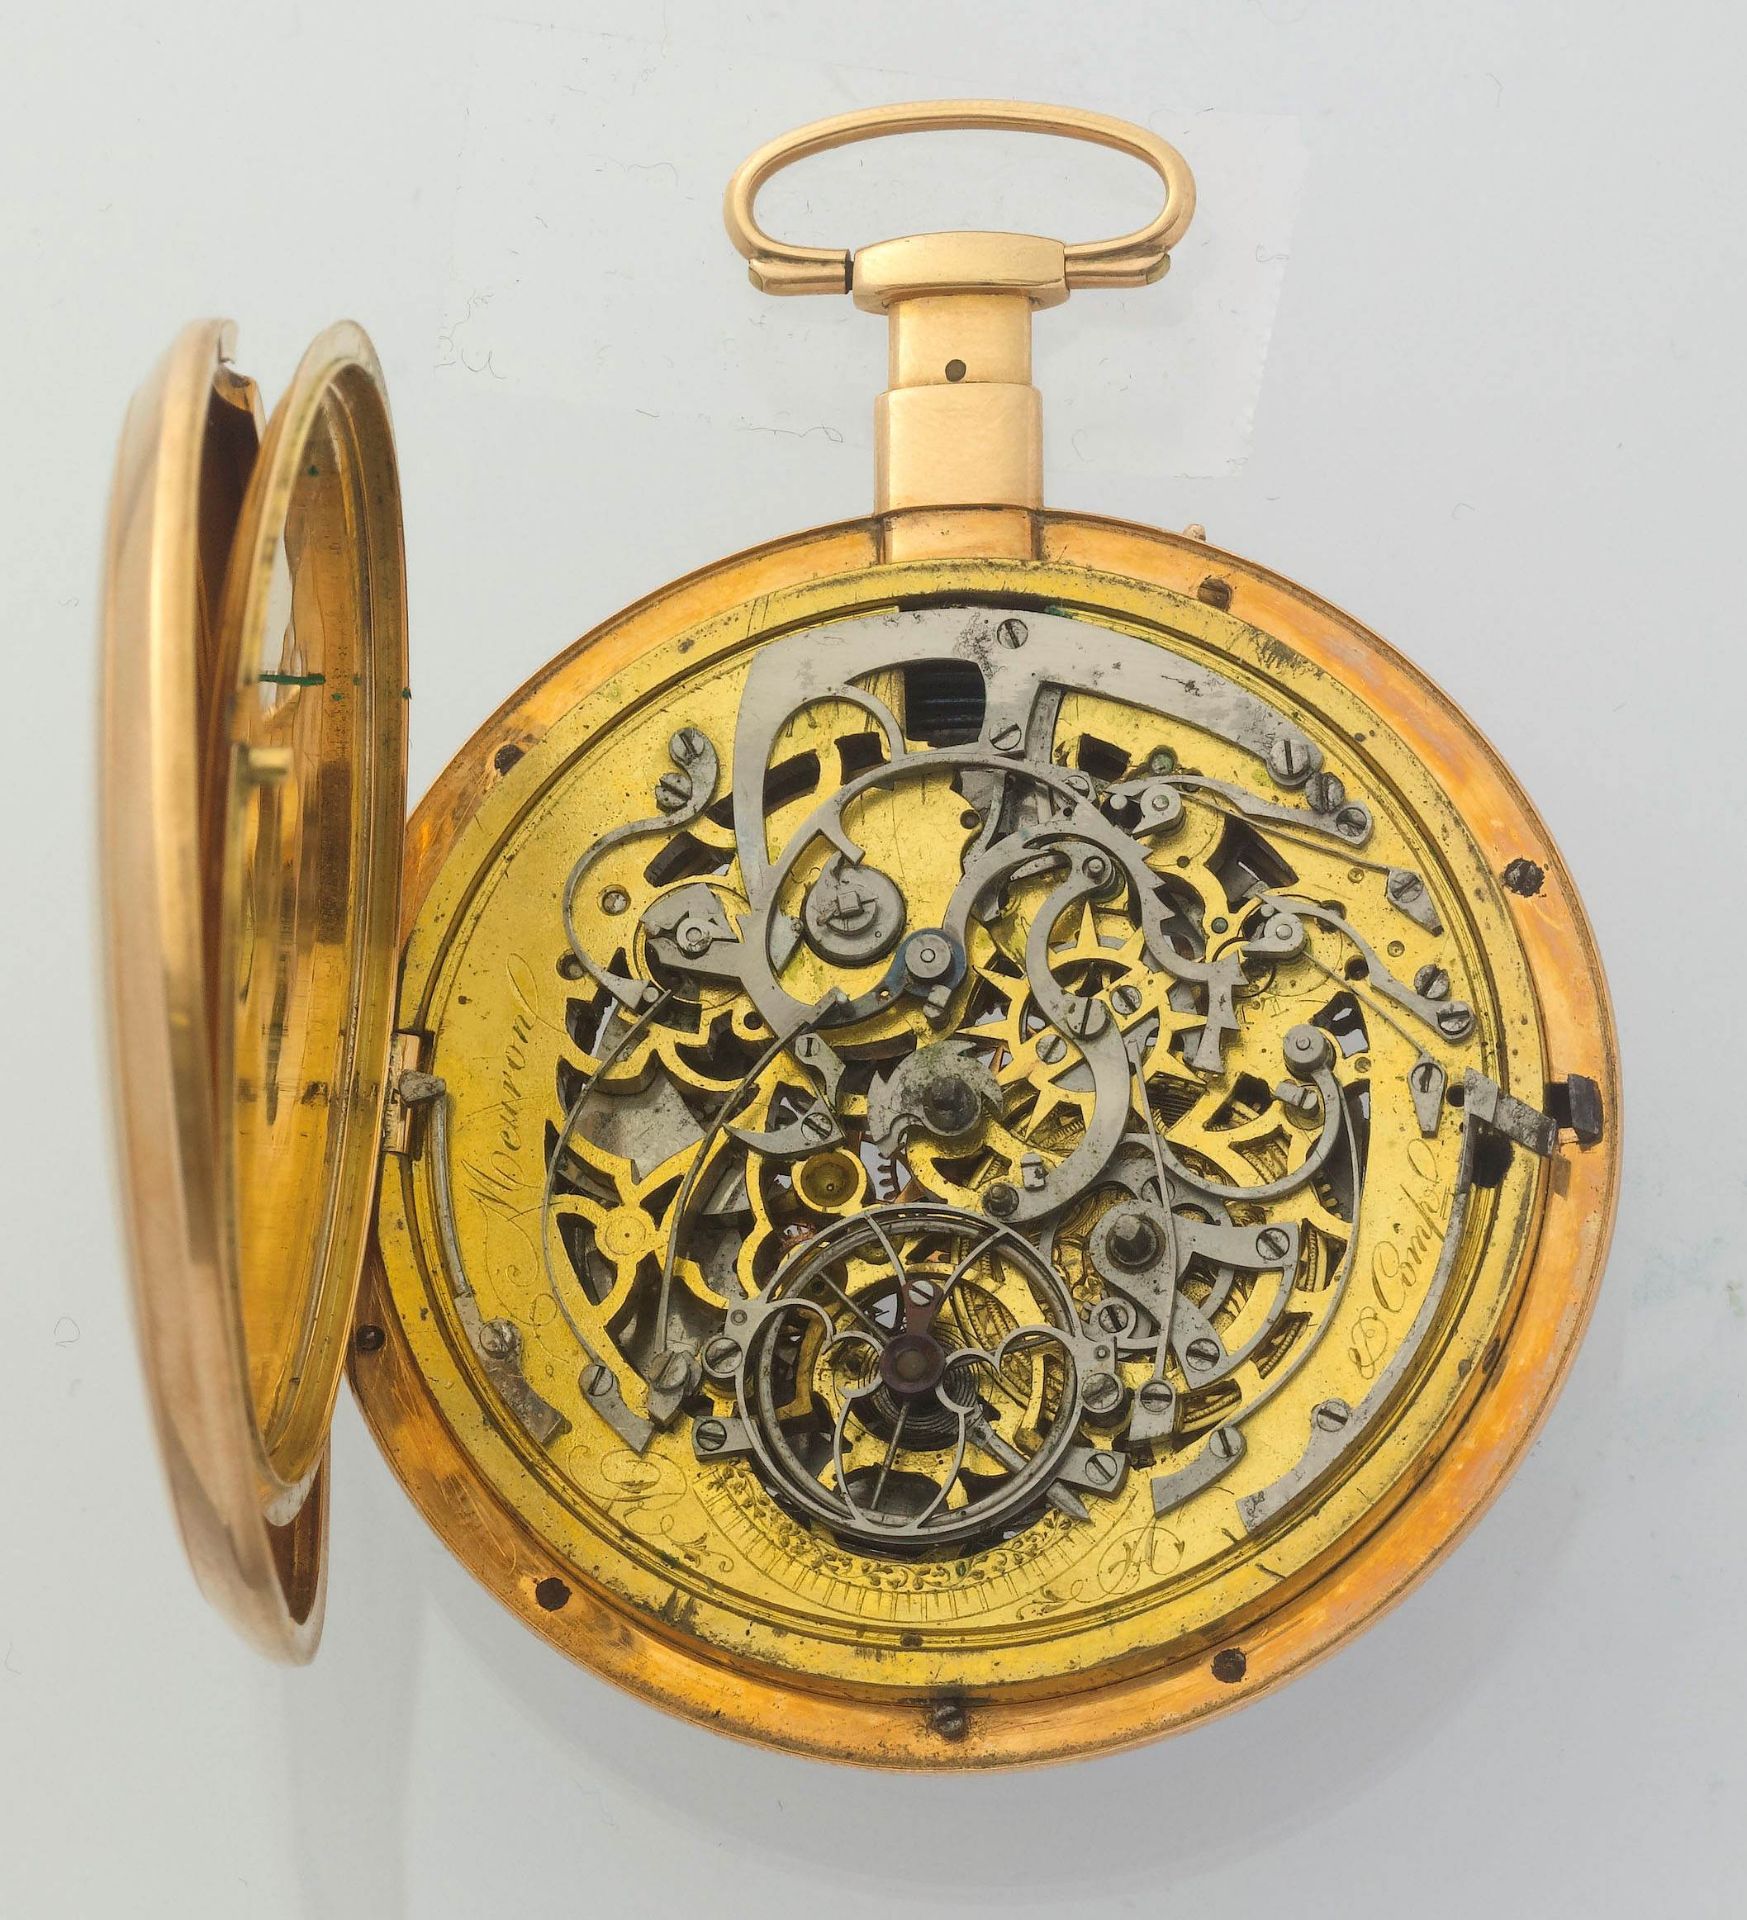 Meuron et Comp., large skeleton watch with 1/4-repeater and automation, ca. 1810. - Image 3 of 4